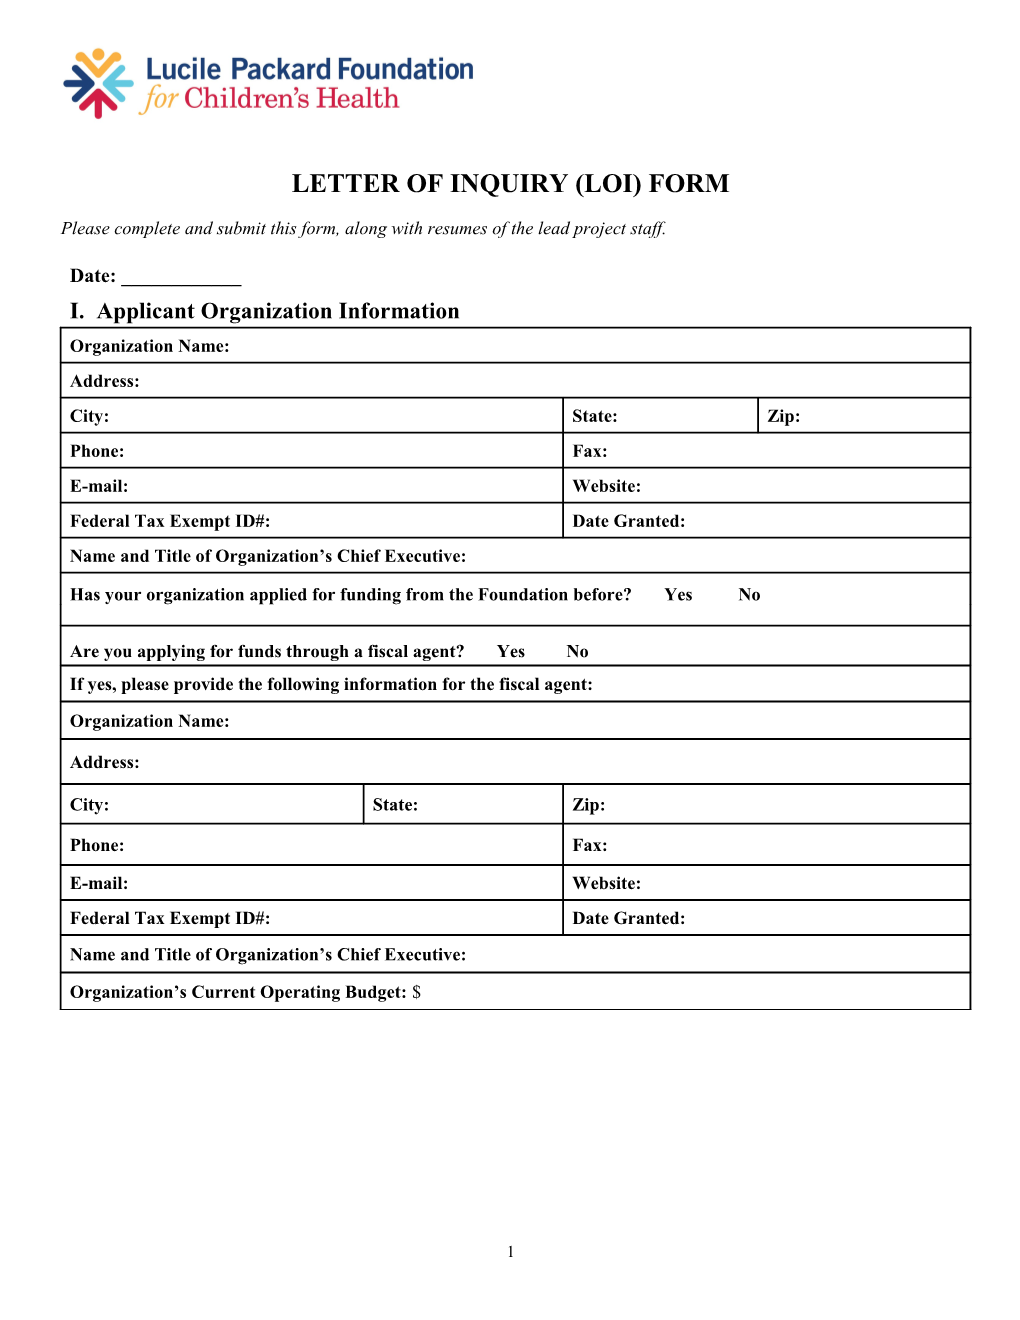 Letter of Inquiry (Loi) Form